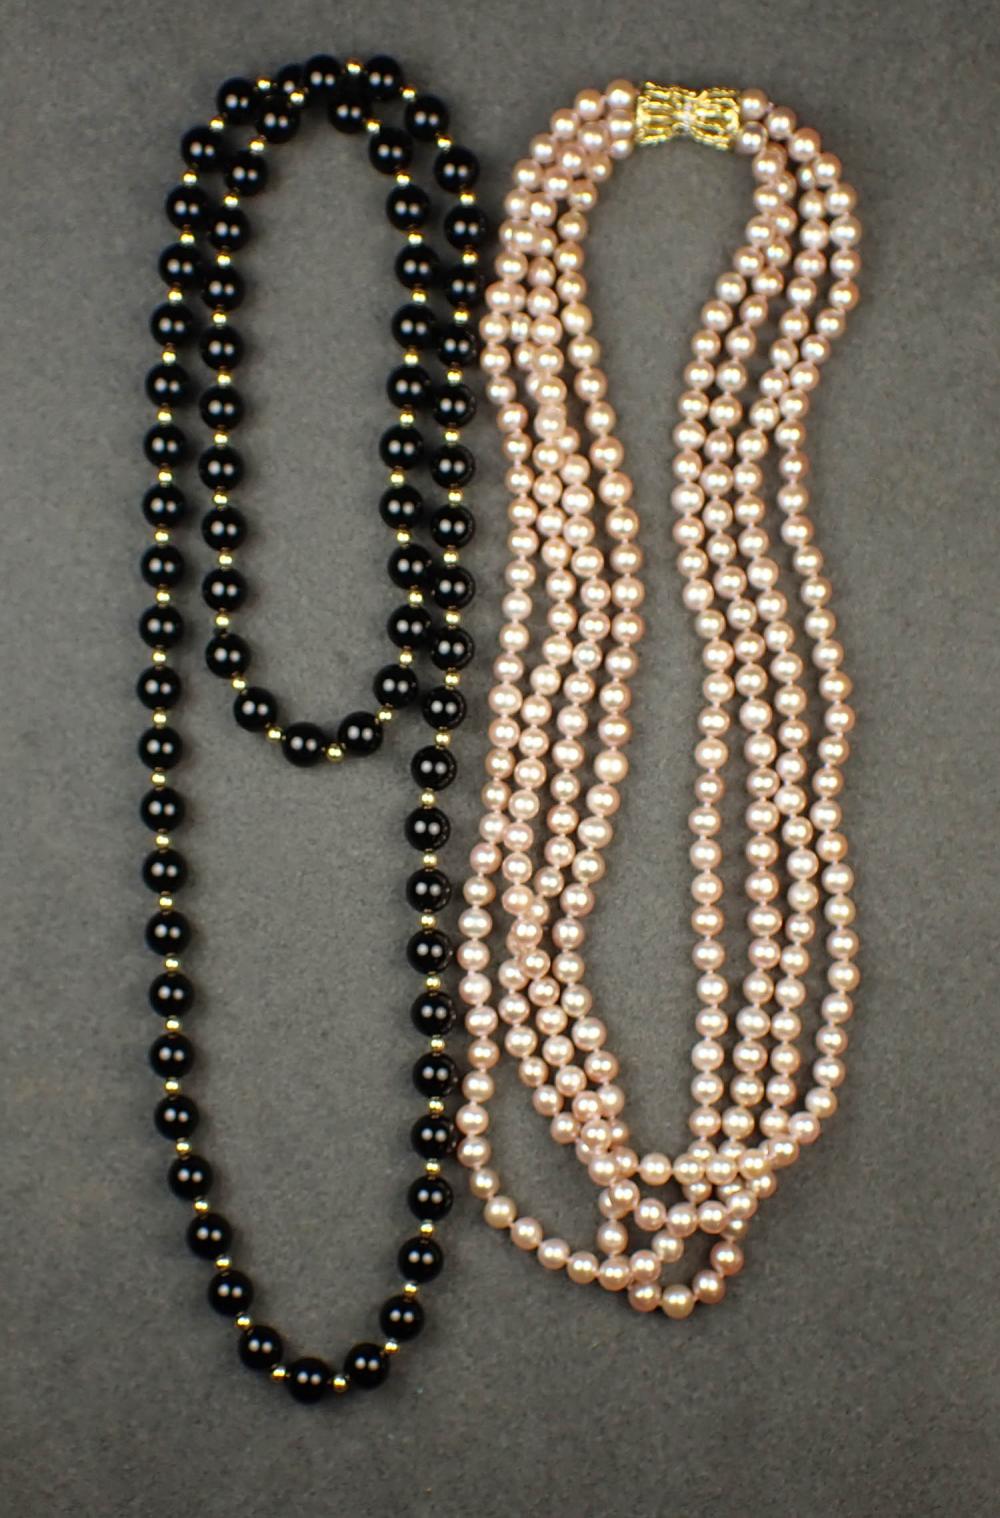 TWO MULTI STRAND BEAD NECKLACESTWO 3b2ce3